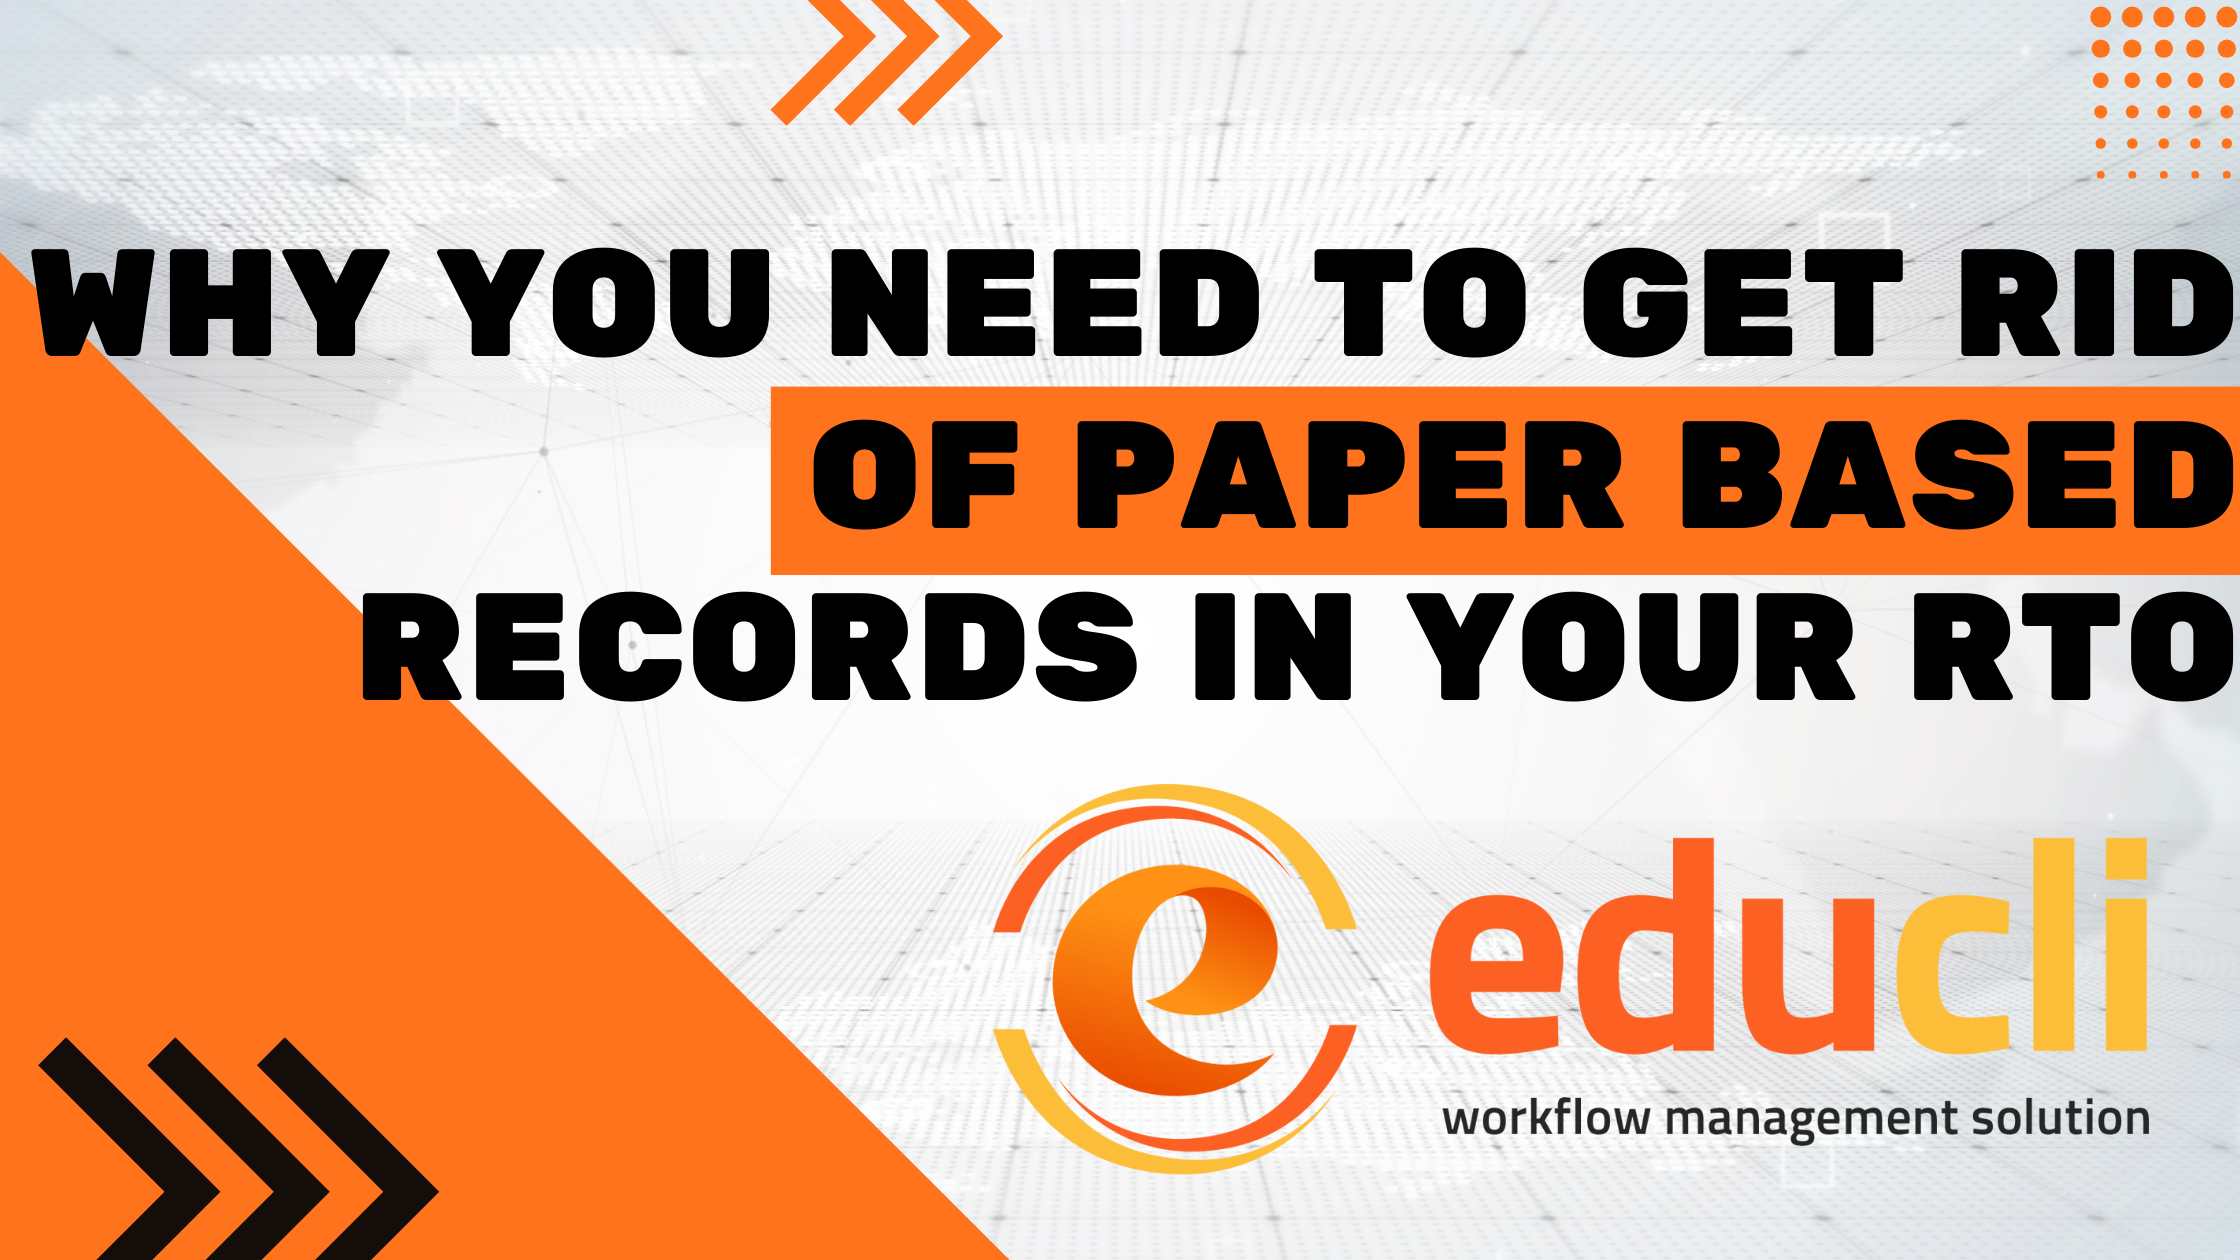 Why you need to get rid of paper based records in your RTO